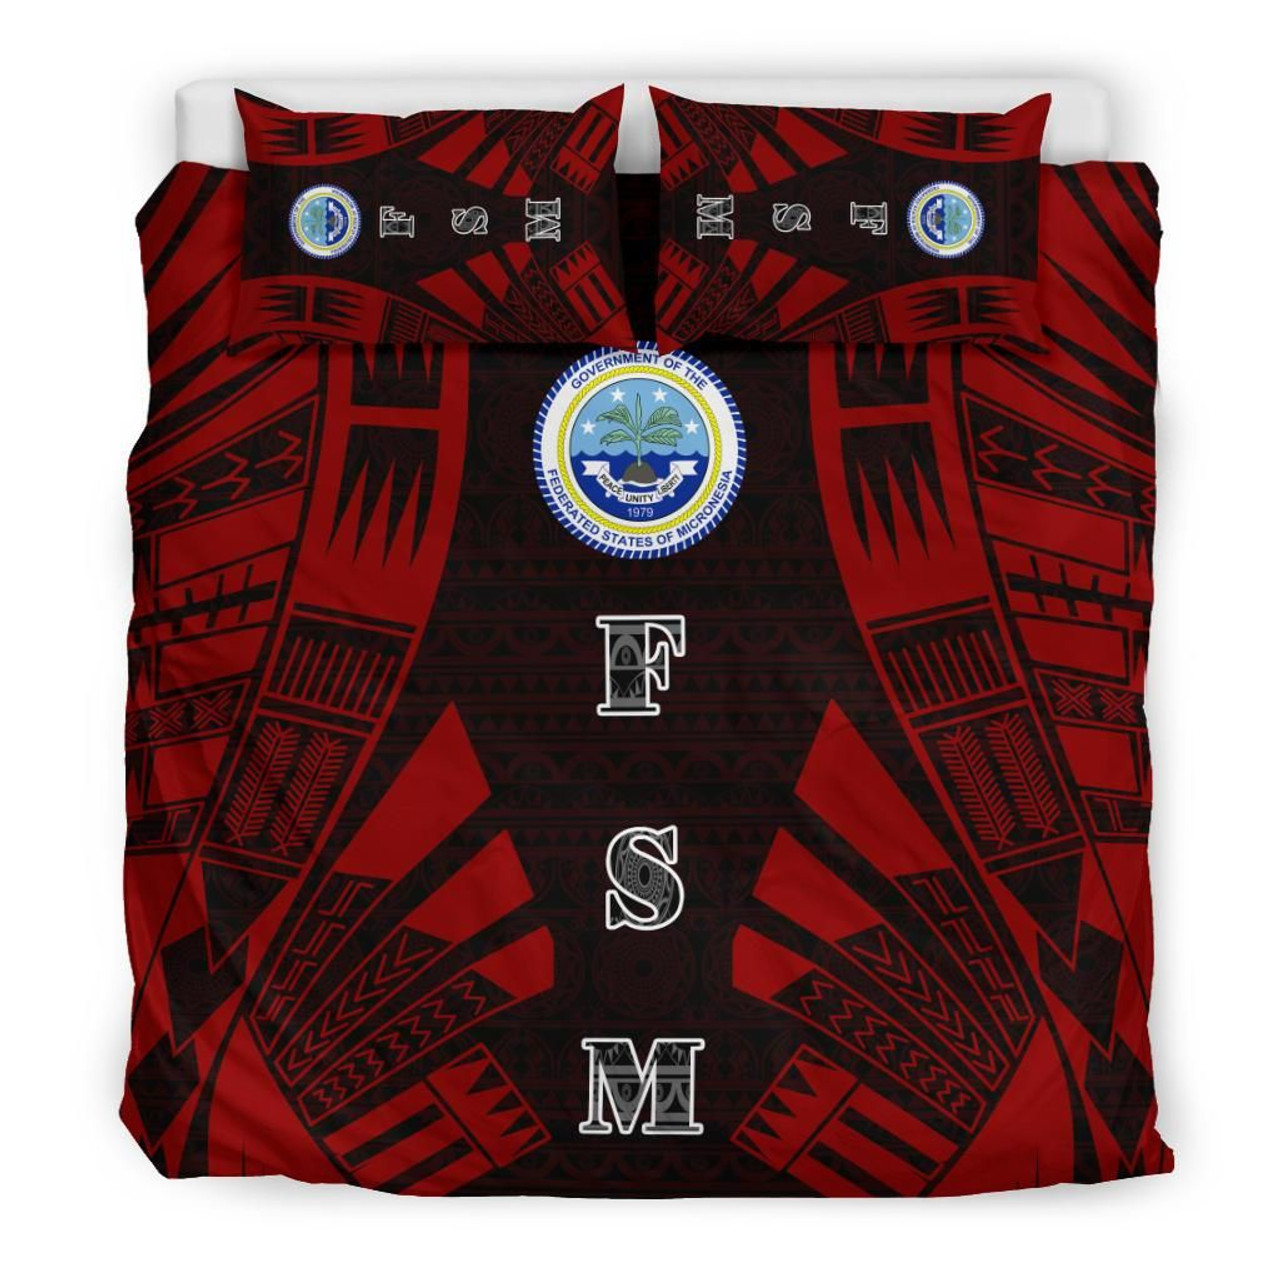 Federated States Of Micronesia Duvet Cover Set - Polynesian Tattoo Red 1